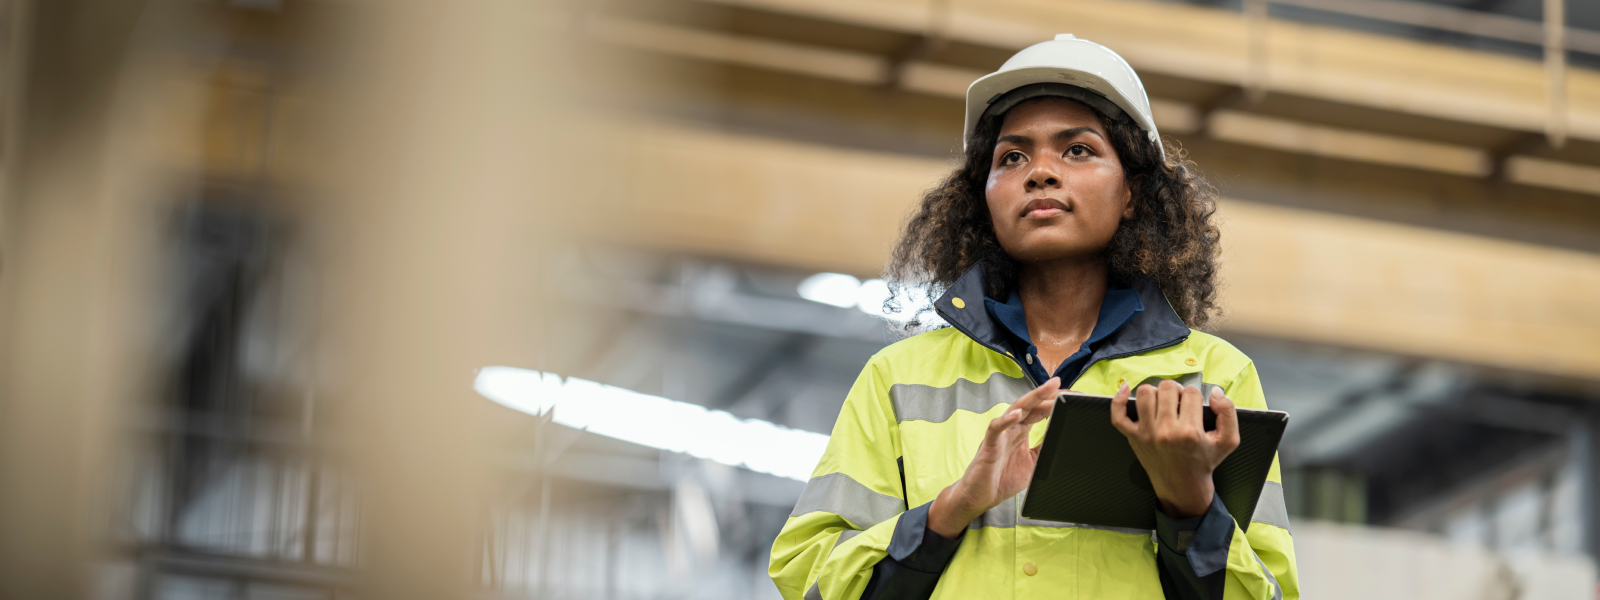 Woman wearing protective workwear using a tablet.